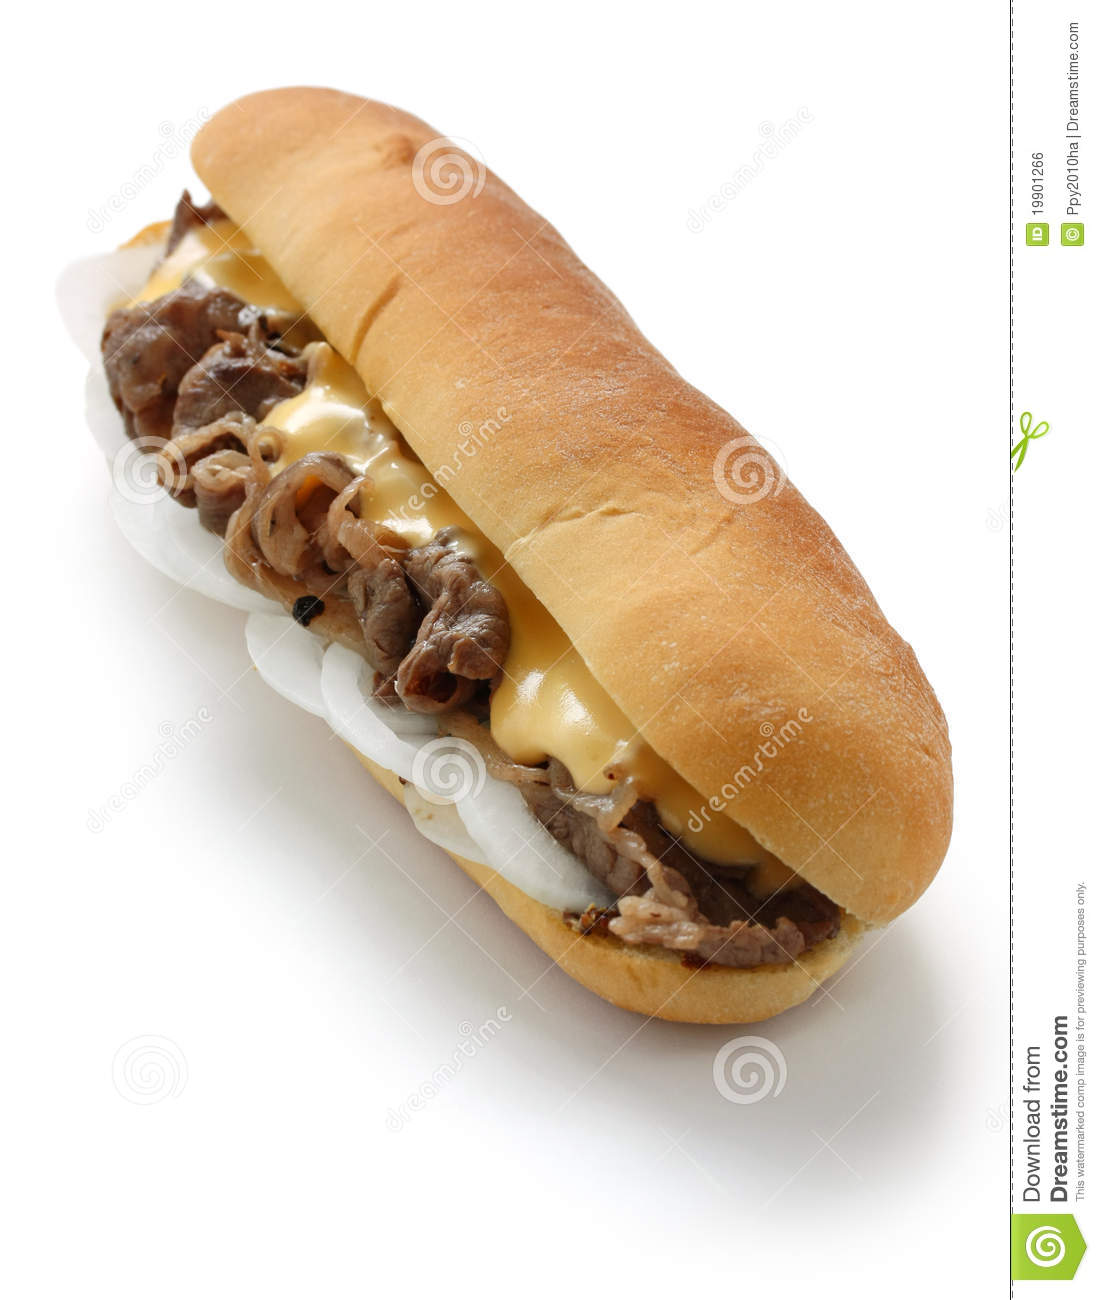 Philly Cheese Steak Sandwich Royalty Free Stock Image   Image    